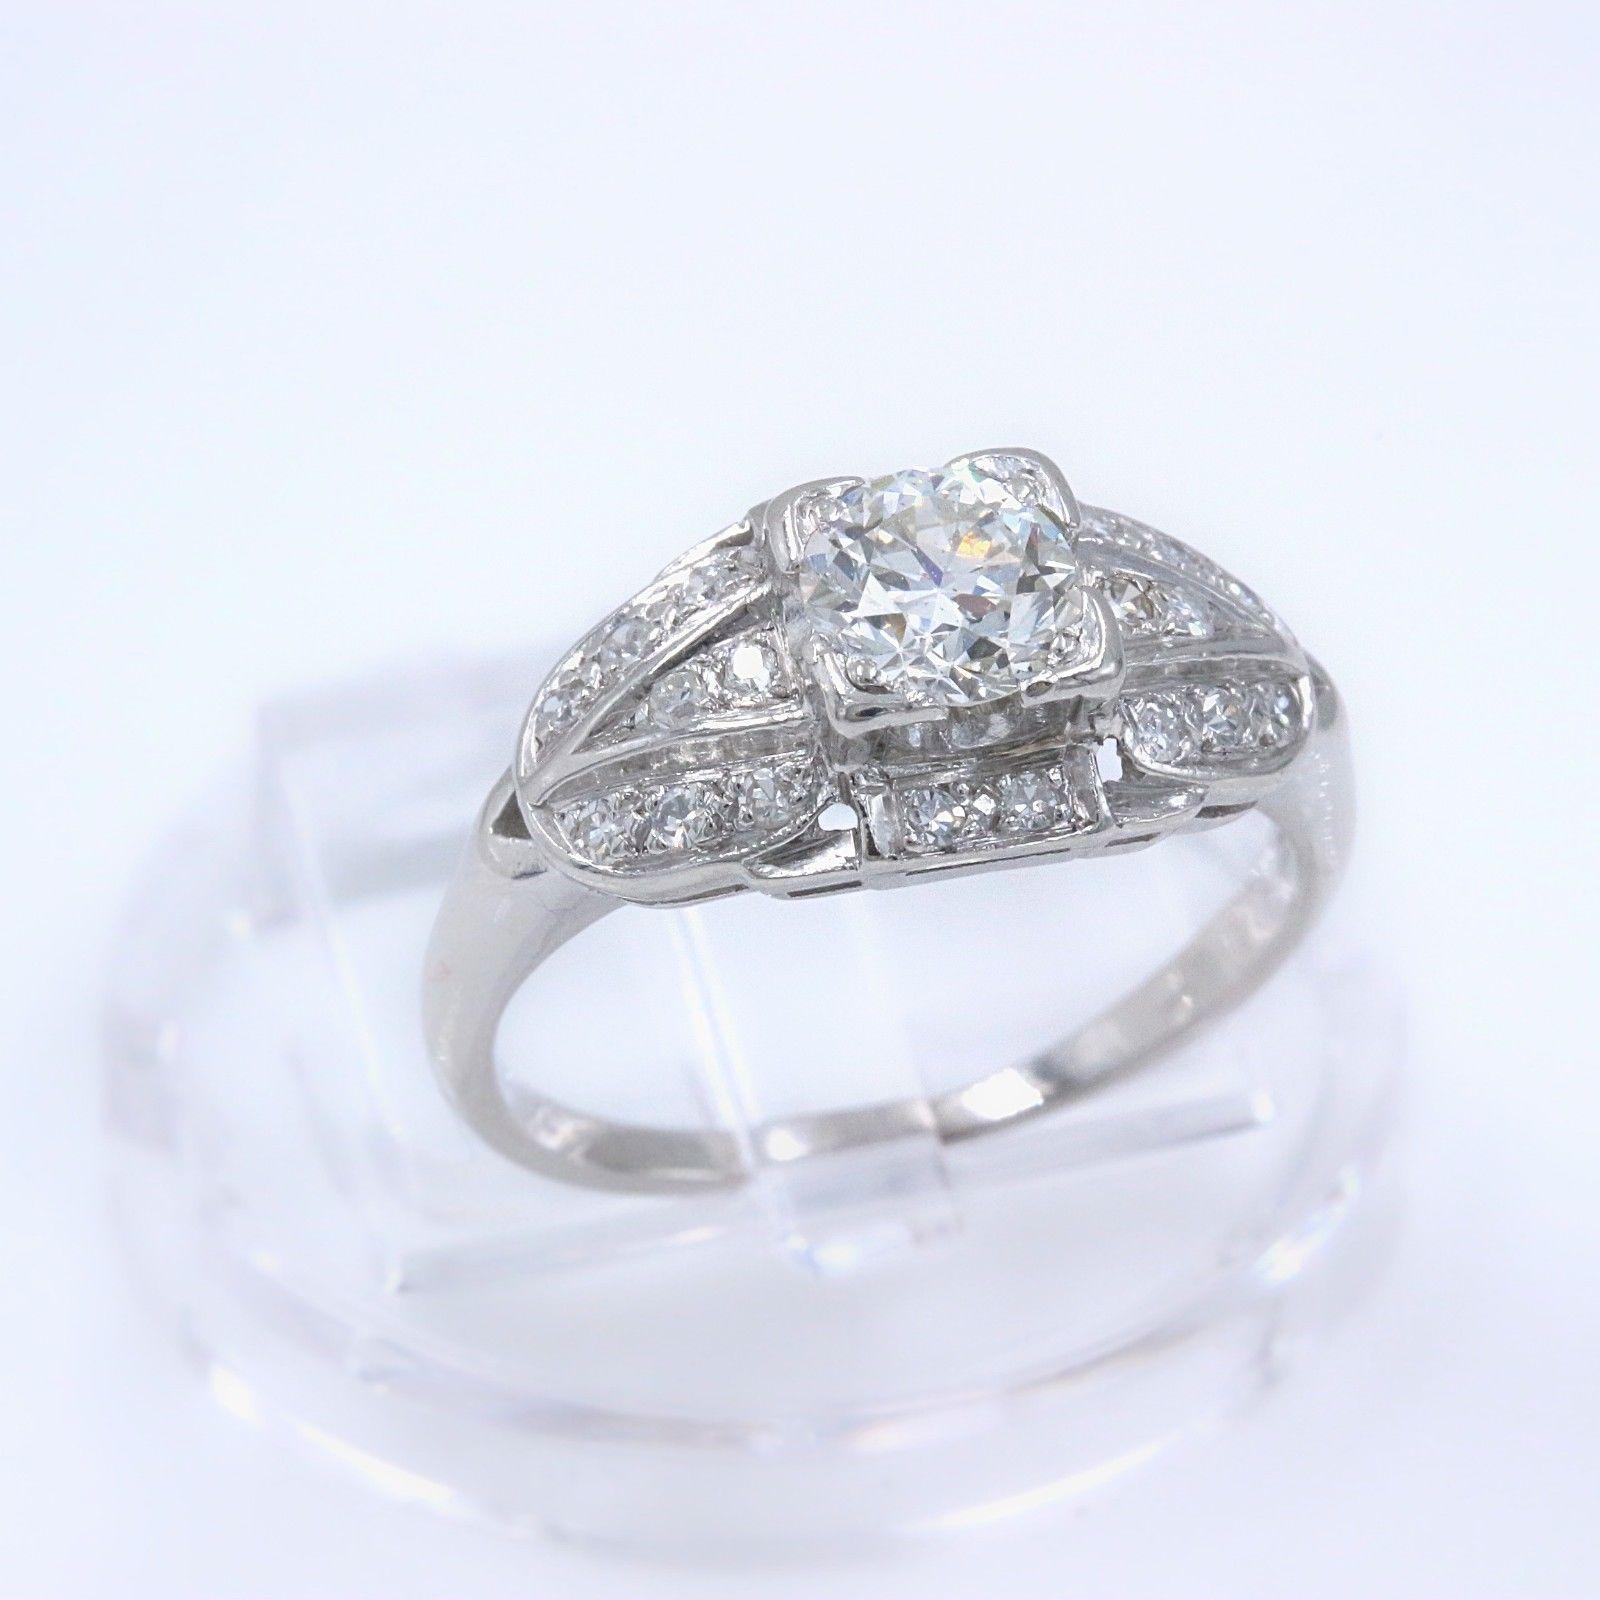 OLD CUT DIAMOND ENGAGEMENT RING

Style:  Solitaire with Side Stones
Metal:  Platinum
Size:  5 - sizable
Total Carat Weight:  1.08 twc
Diamond Shape:  Old Cut Round 0.58 cts H color, SI1 clarity
Accent Diamonds:  20 Old Cut Diamonds 0.50 tcw H color,